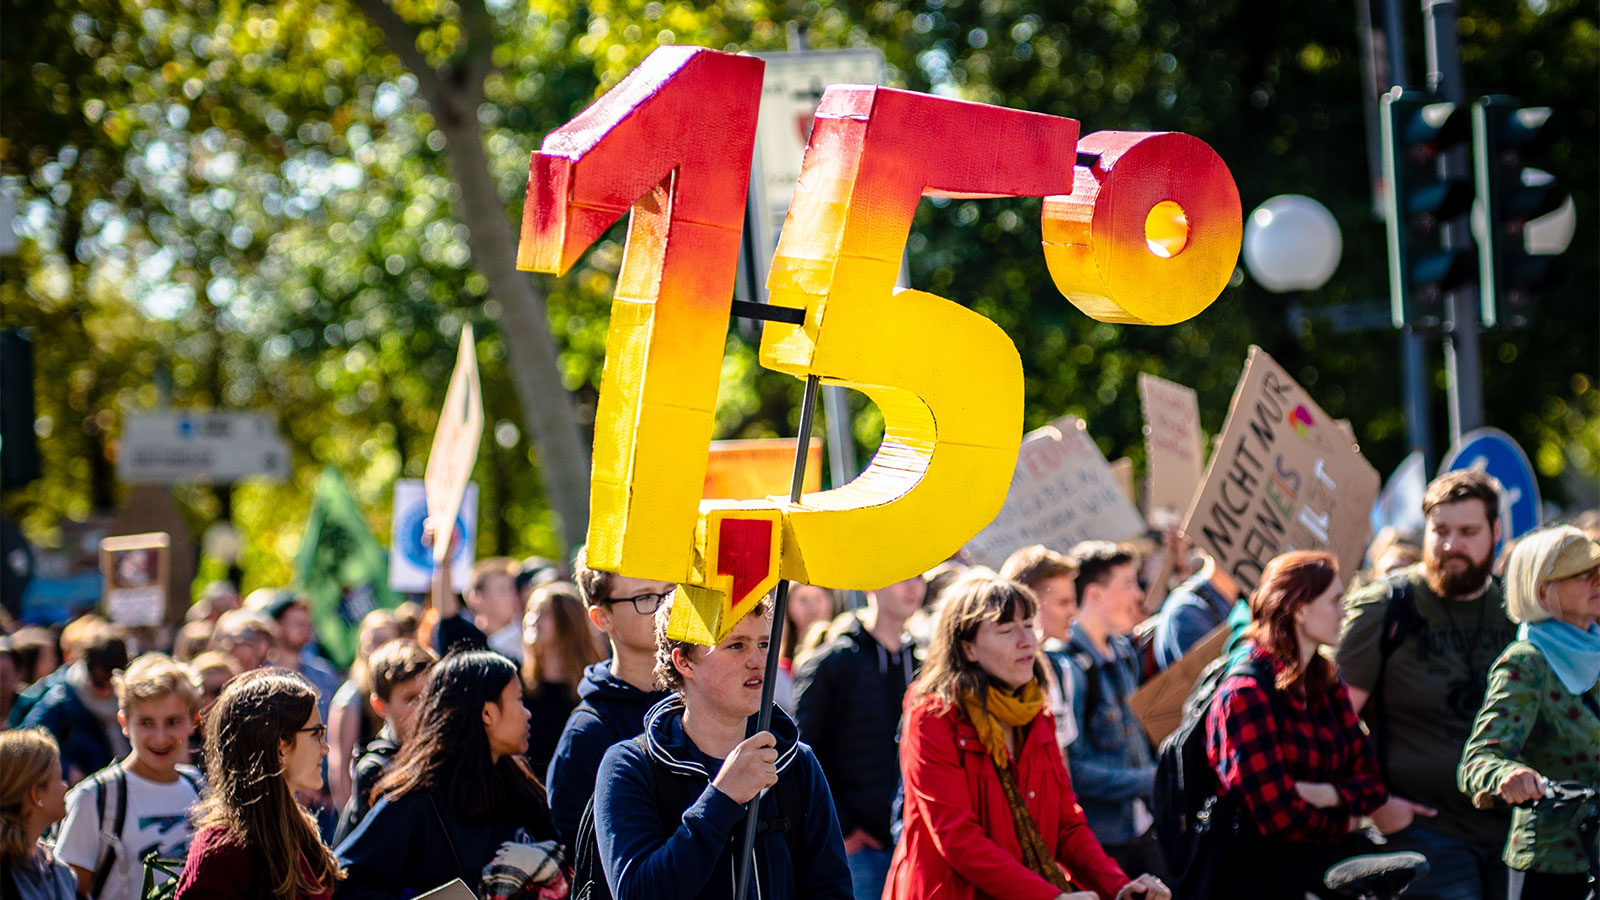 large group of protesters, central person is holding up a large red and yellow 3-D sculpture of the number 1,5º